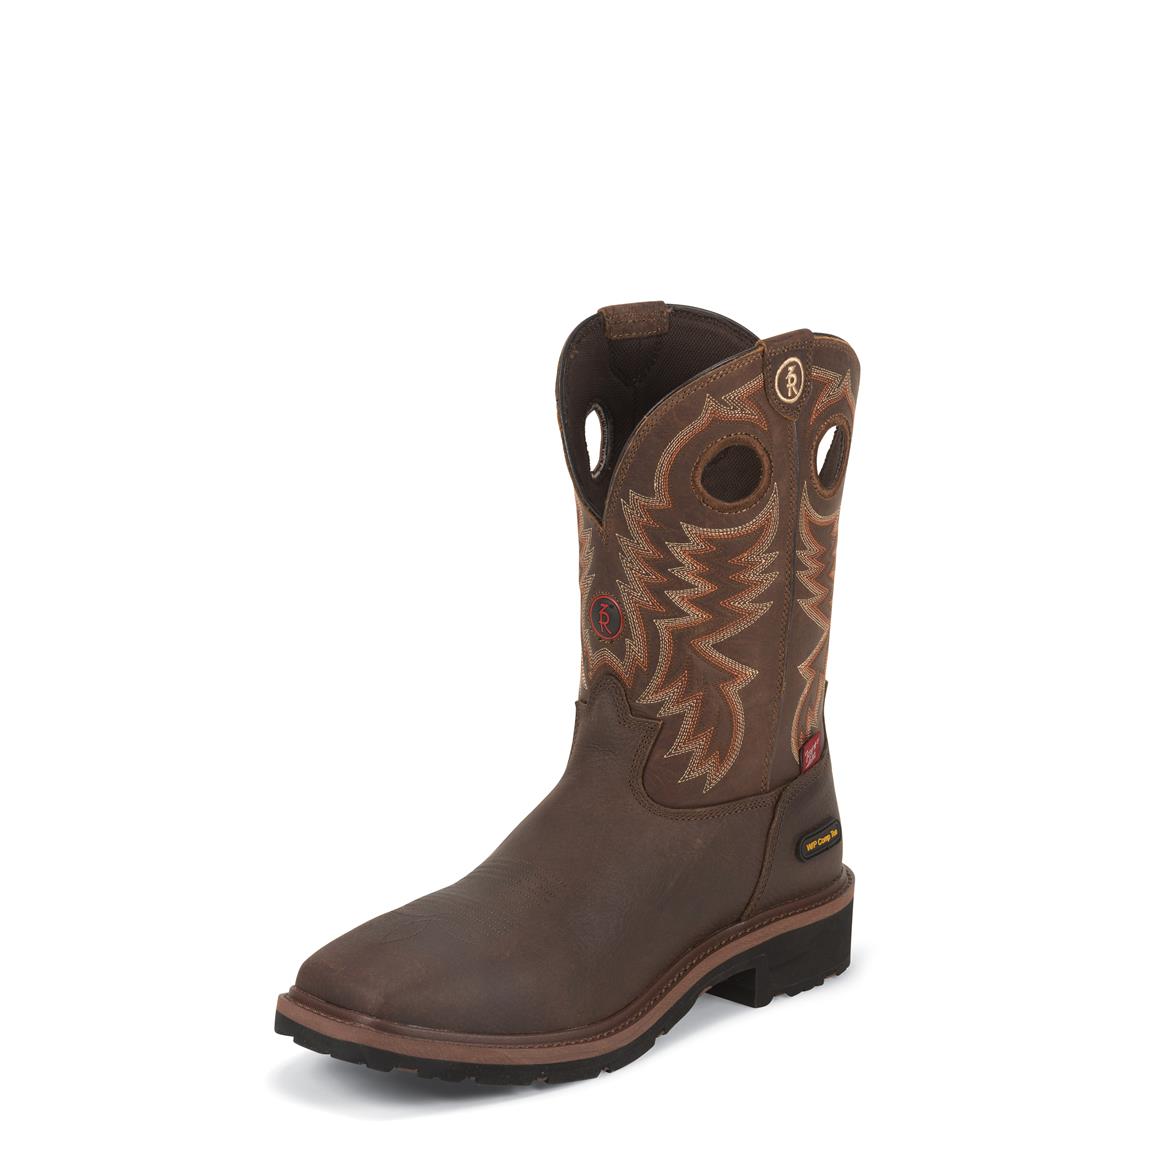 Tony Lama Briar Grizzly 3R Work Boots, RR3303, Composite Toe ...